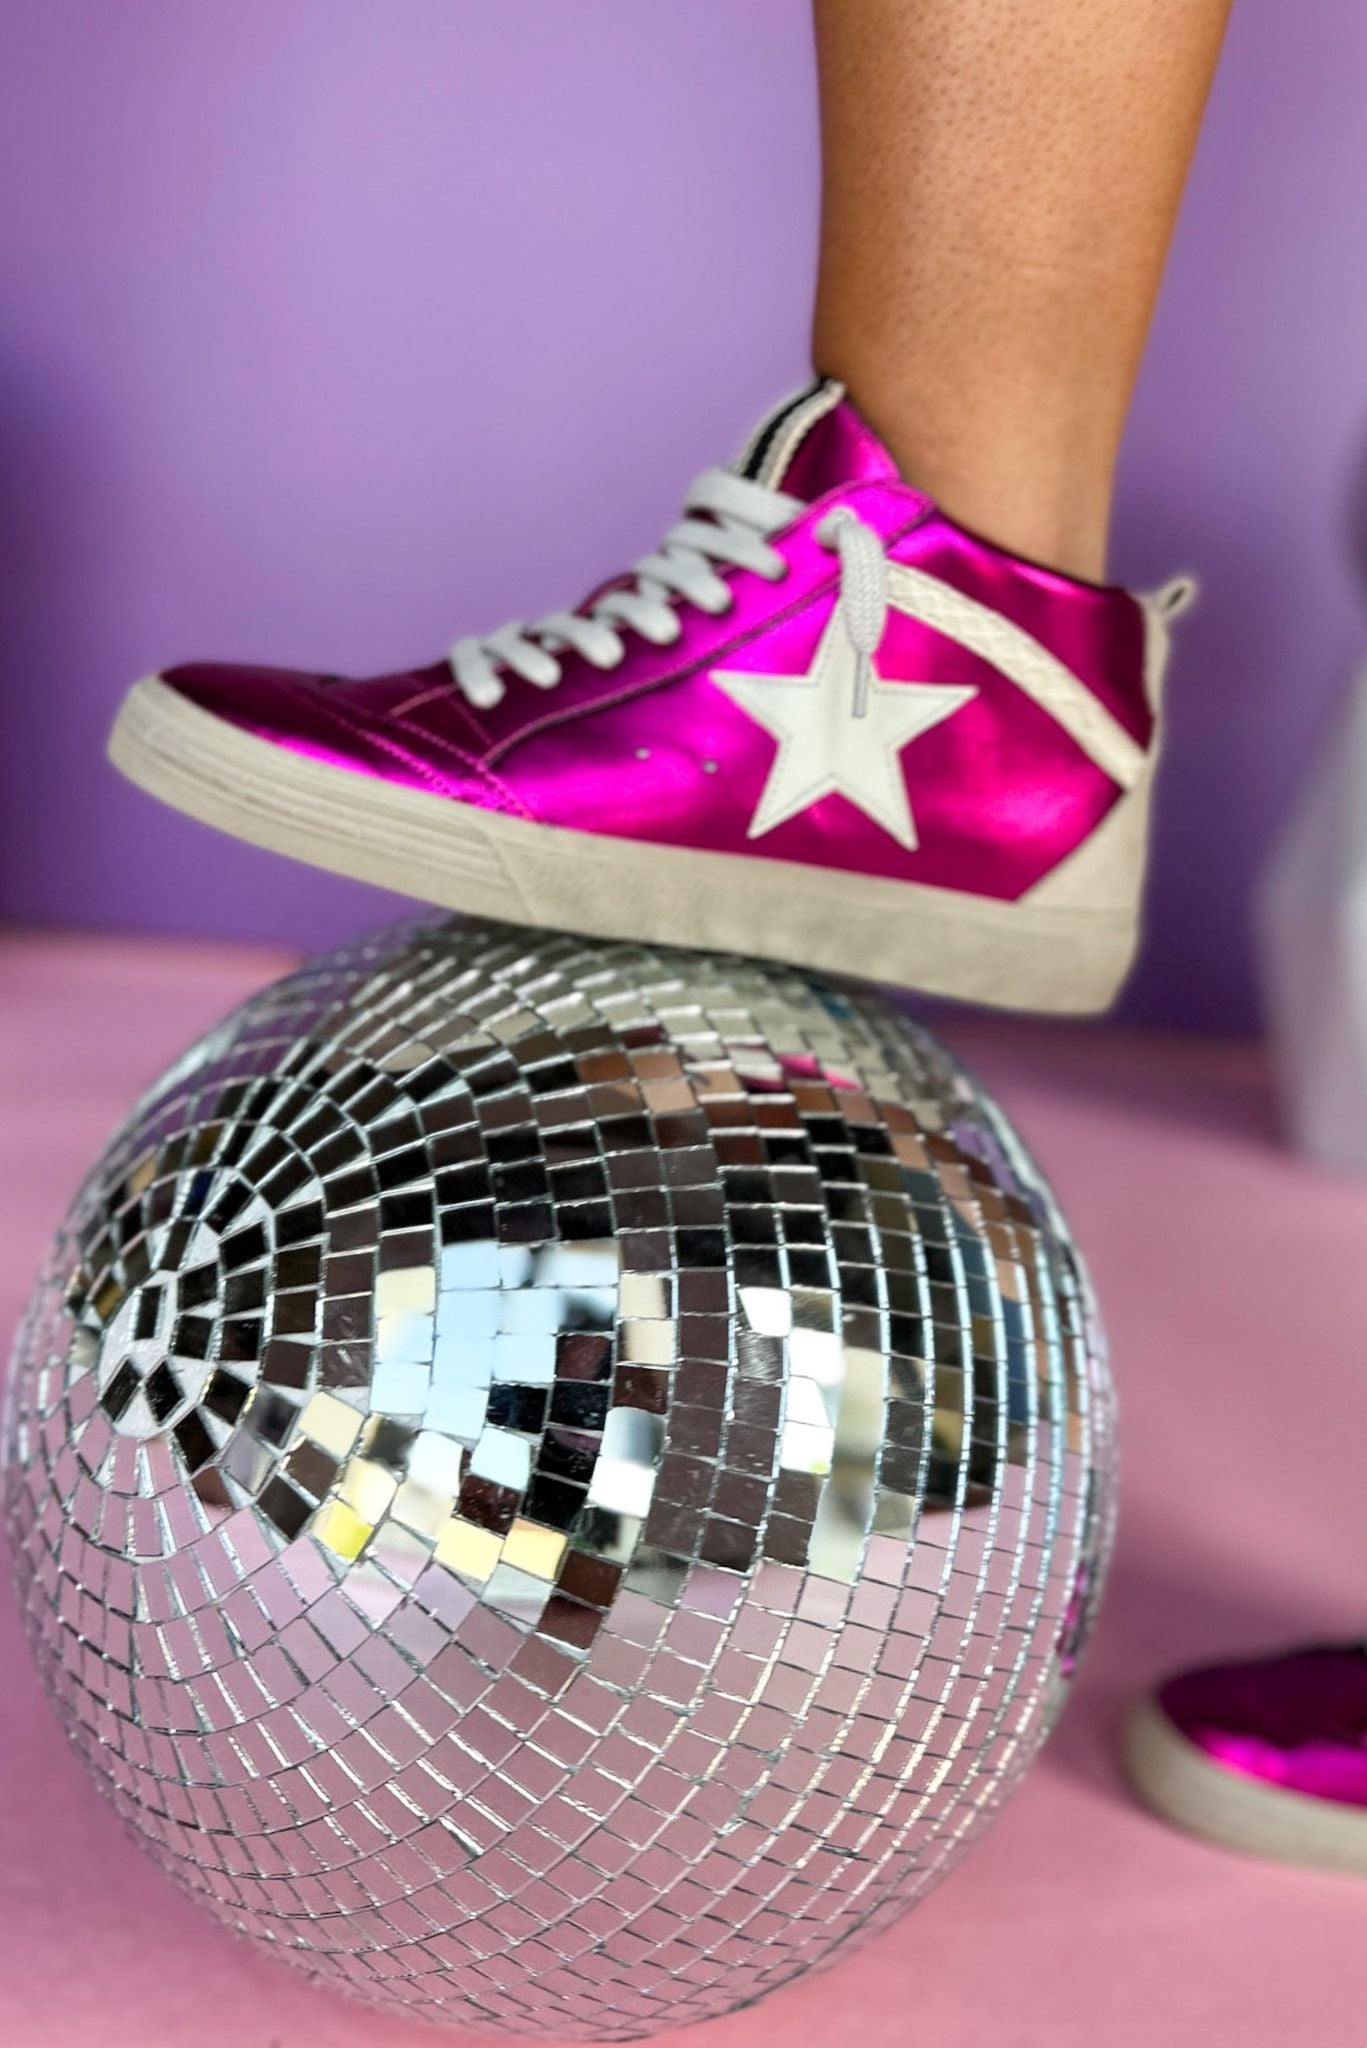  Shu Shop Bright Pink Metallic High Top Star Sneakers, shoes, sneakers, elevated sneakers, shop style your senses by mallory fitzsimmons